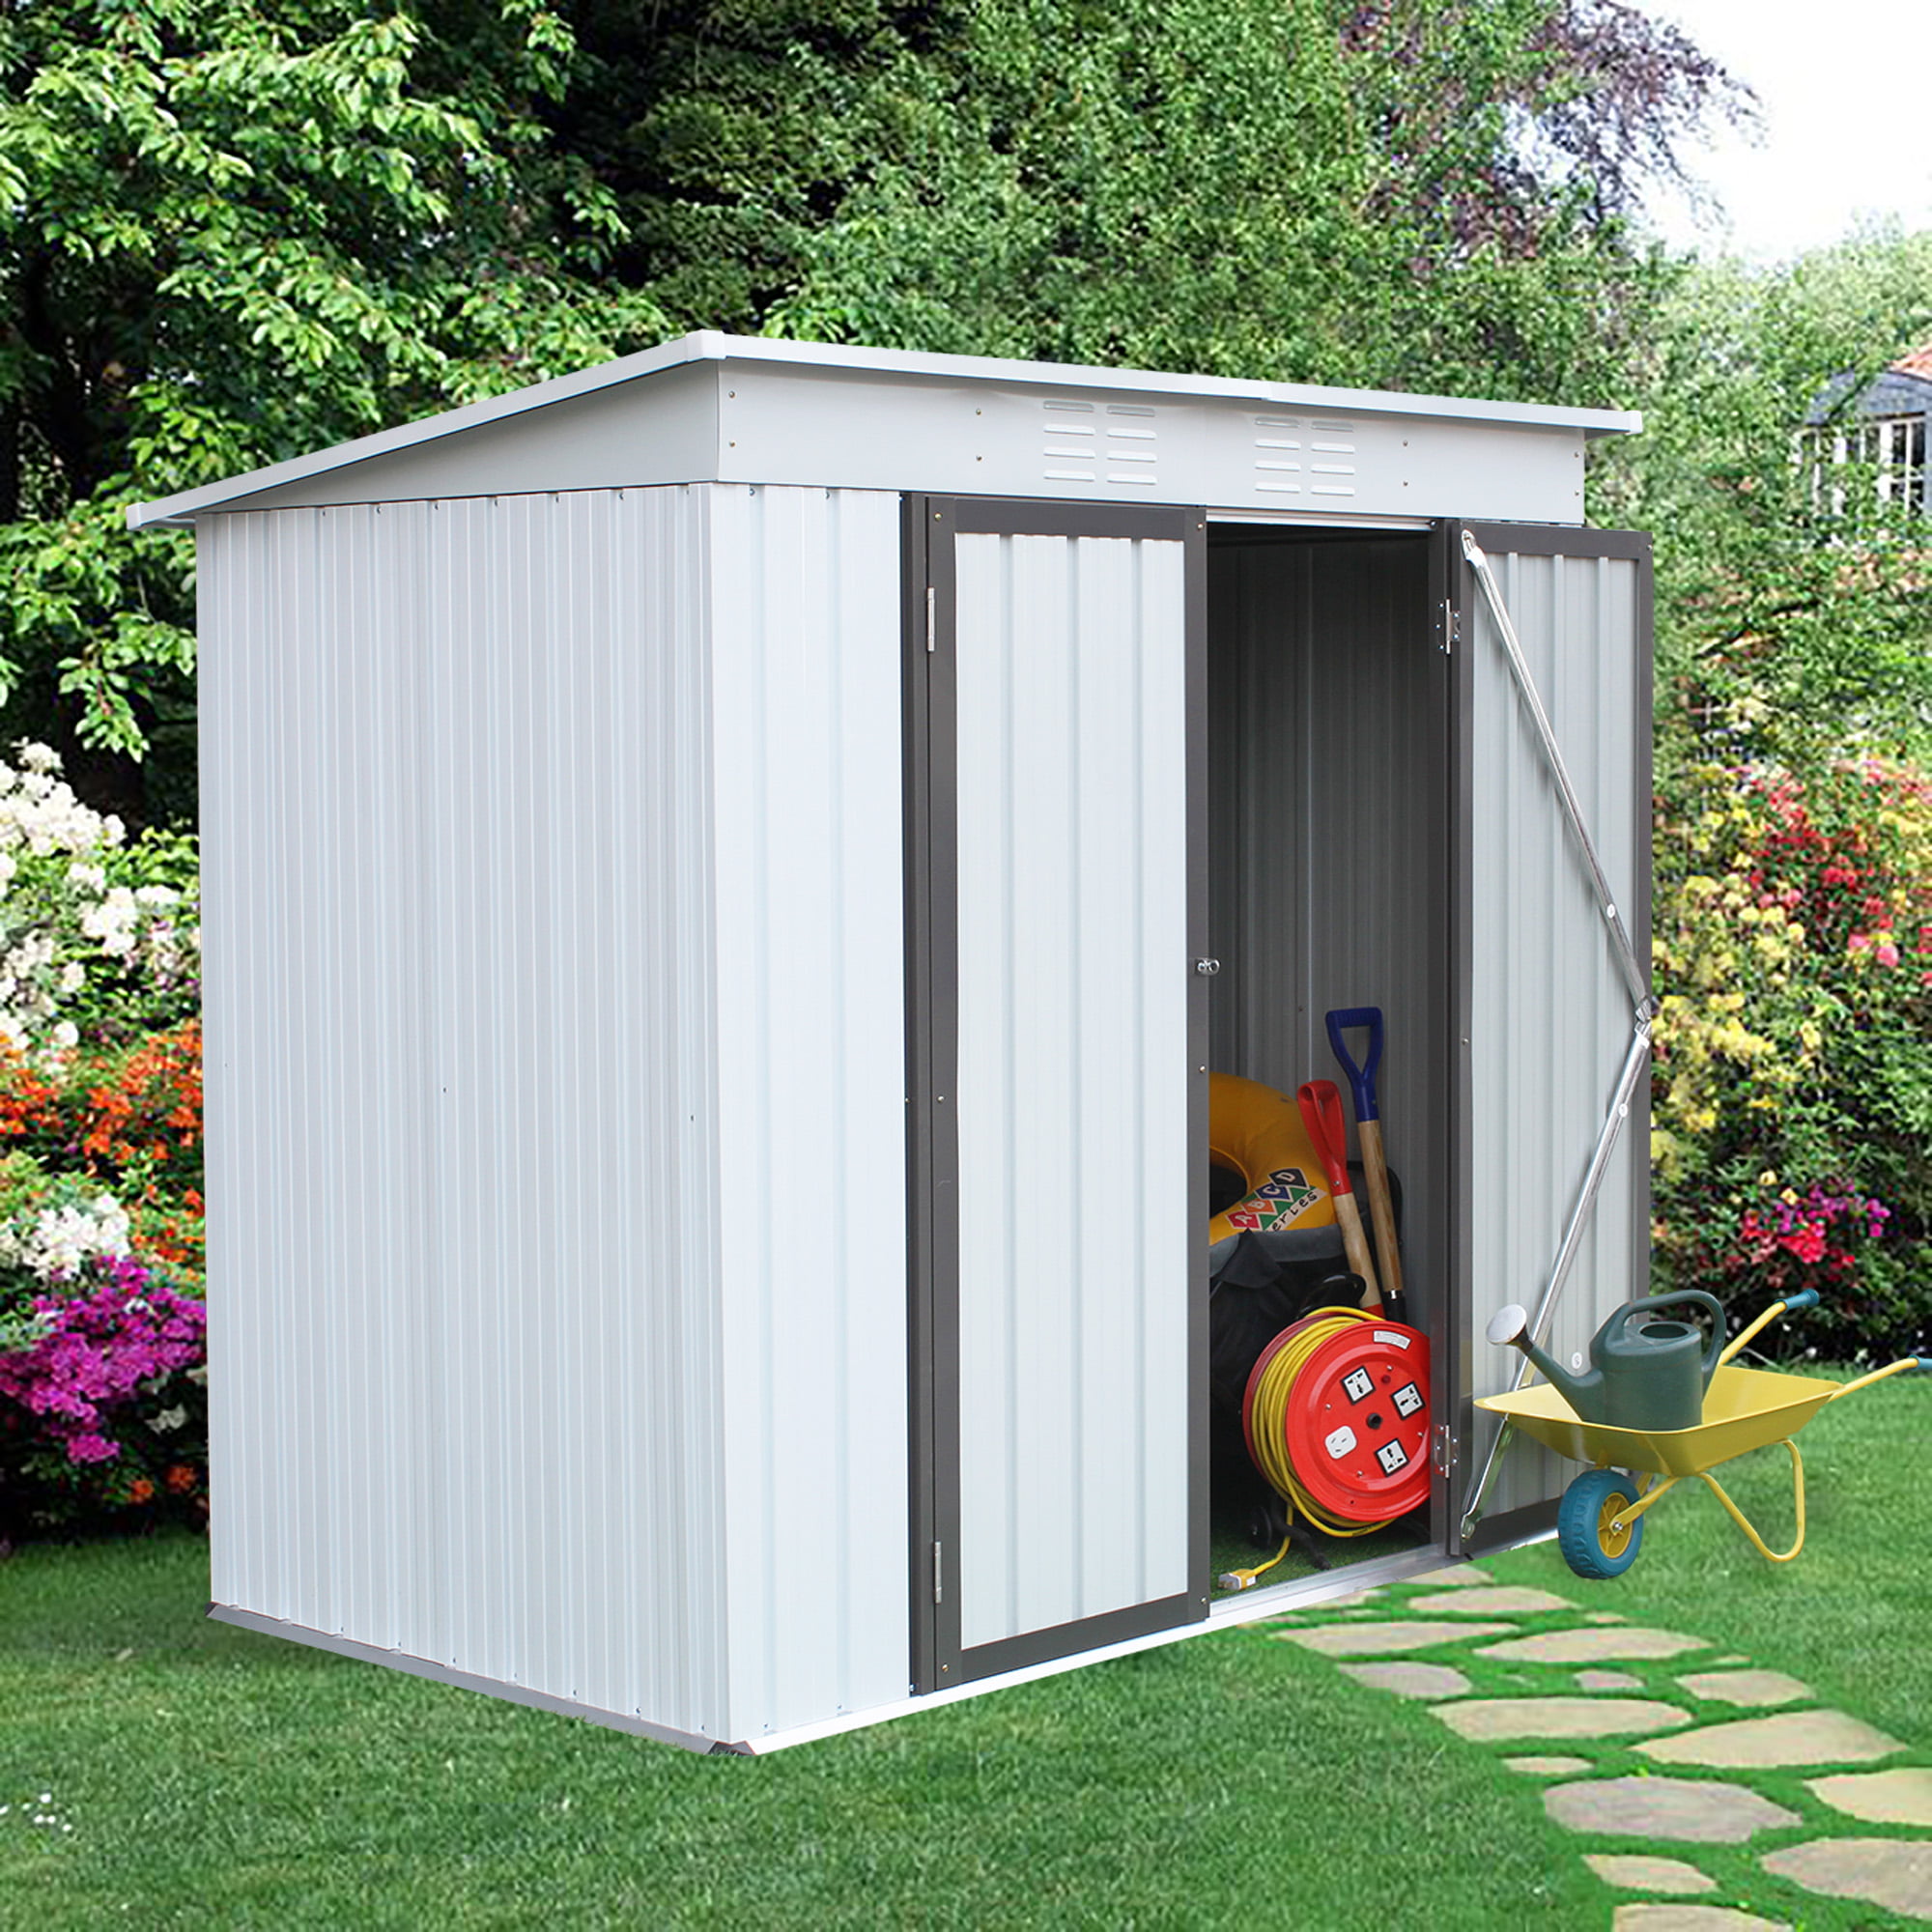 HYD-Parts Outdoor Storage Shed Steel 6x4 FT Outdoor Tool Storage Garden Shed W/Sloped Metal Roof 